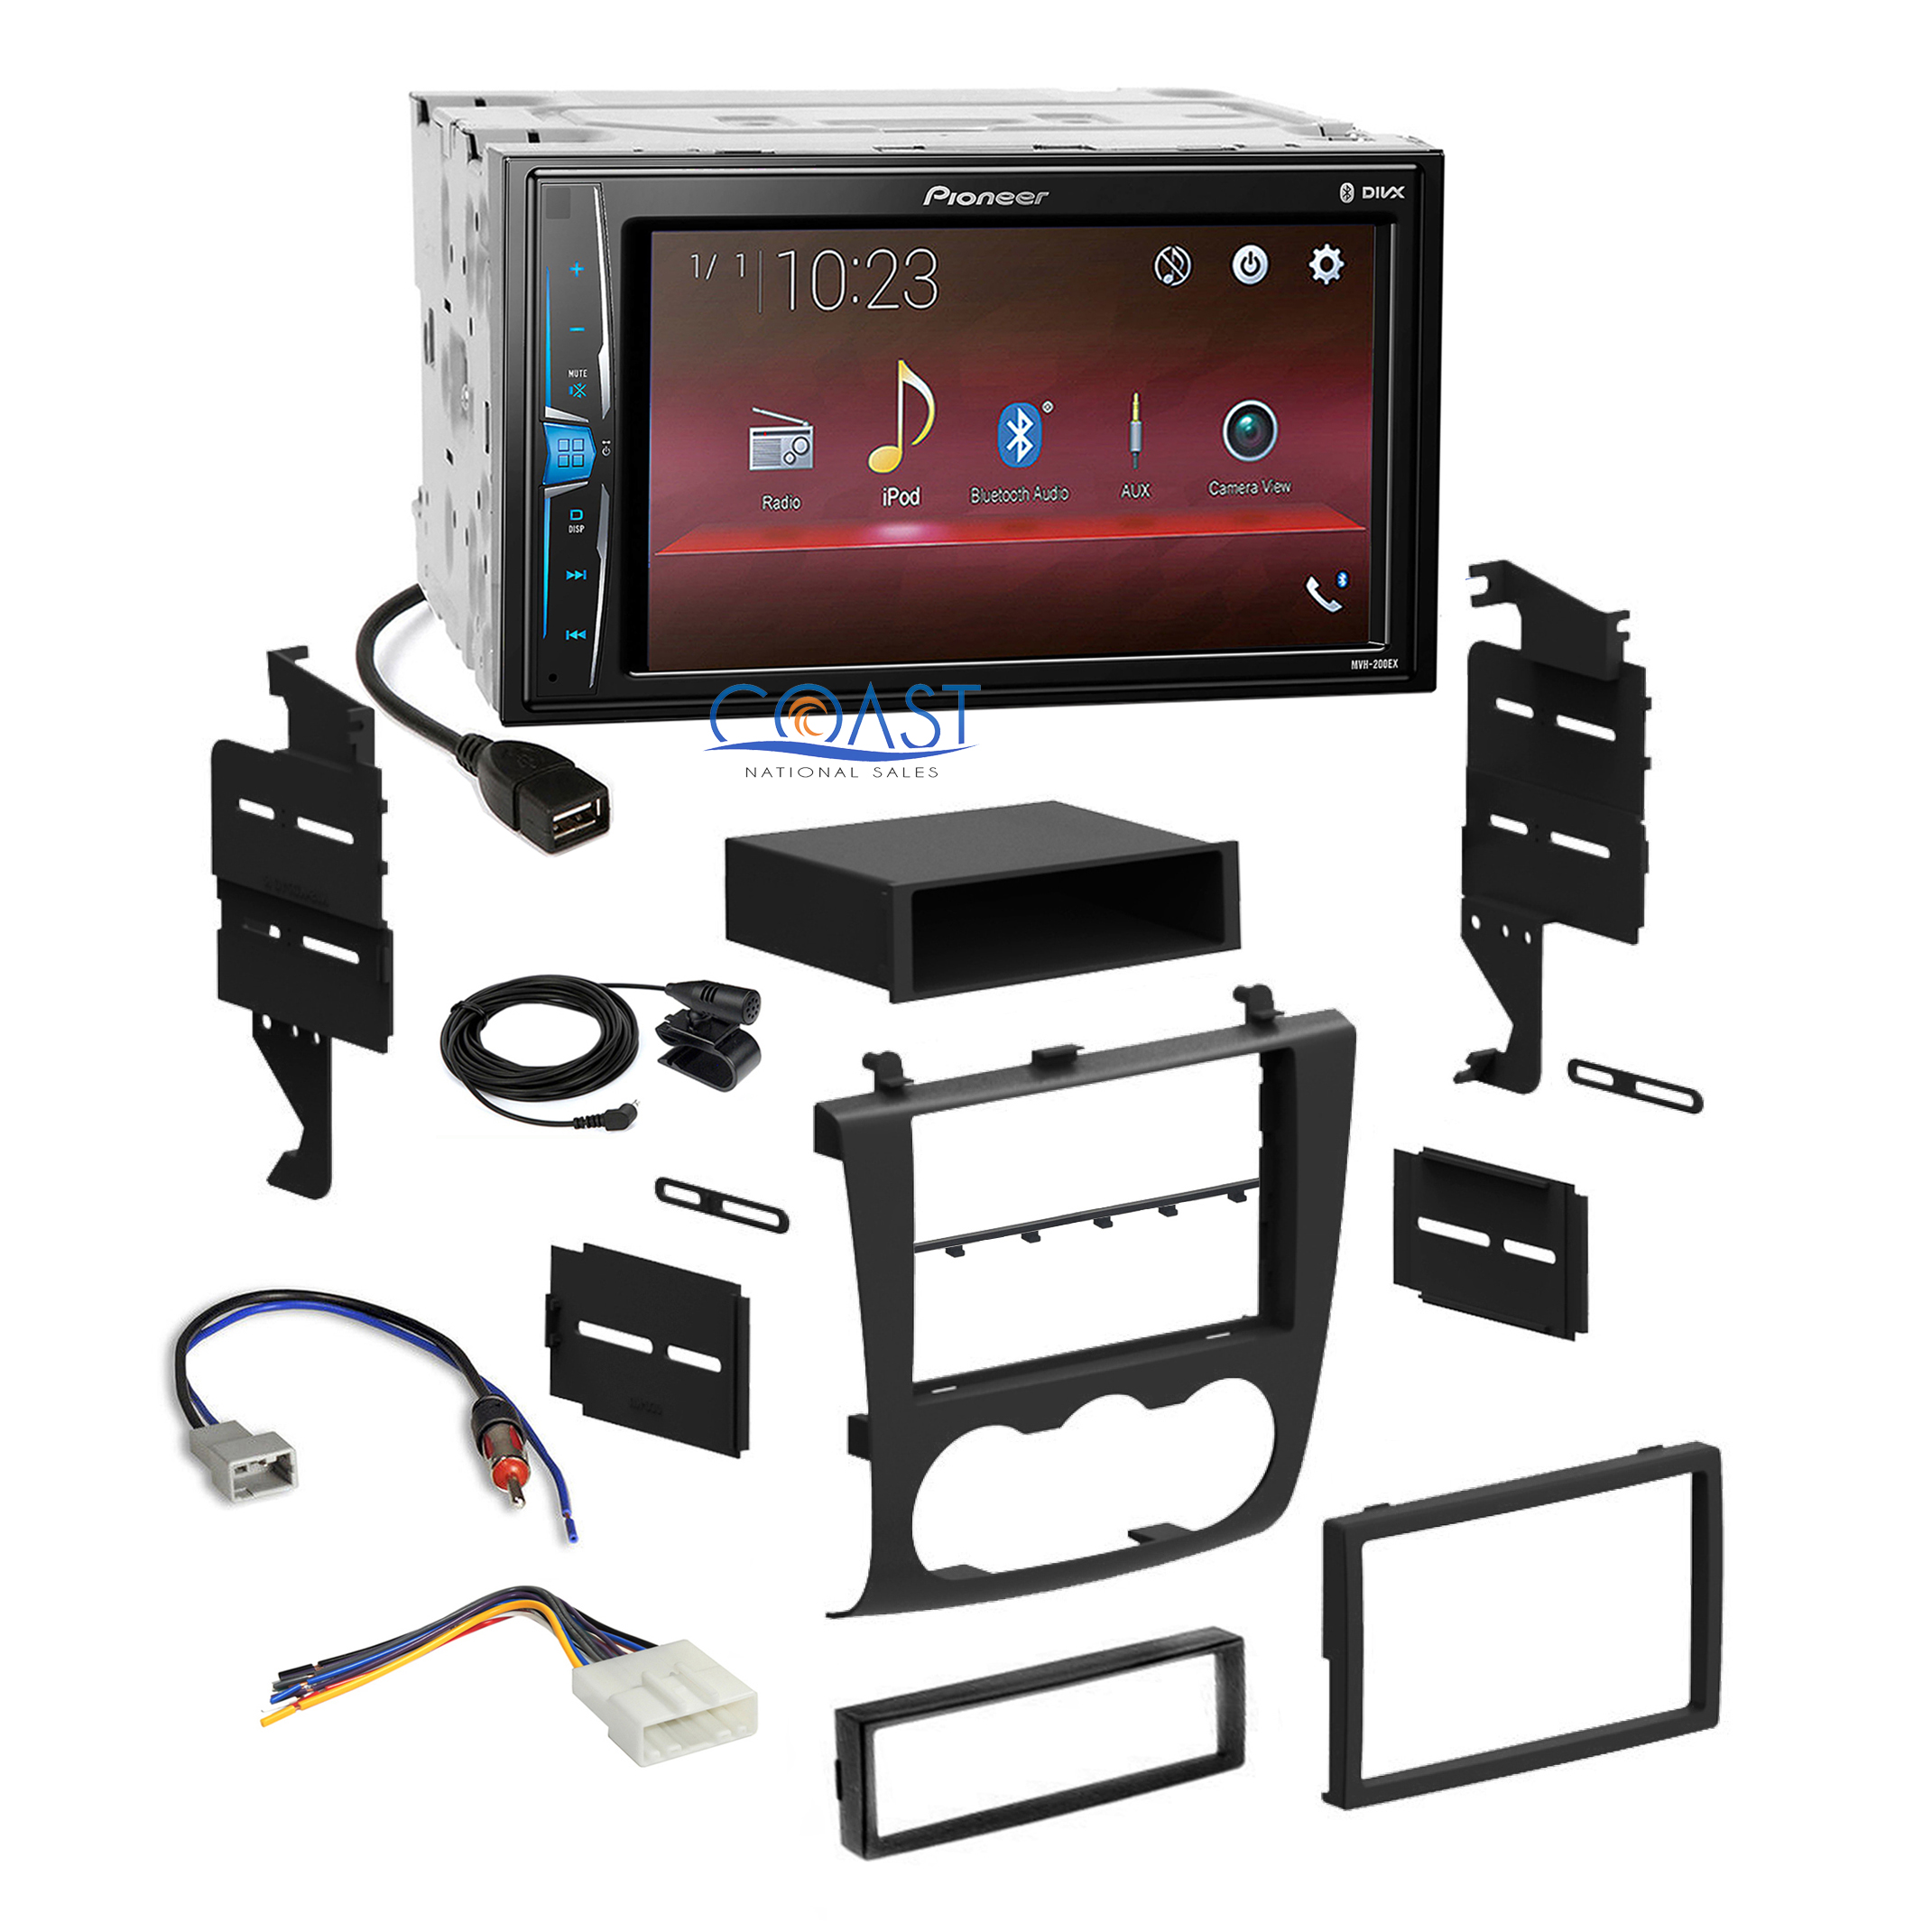 Pioneer MP3 USB BT Camera Ready Stereo Dash Kit Harness for 07-12 Nissan Altima